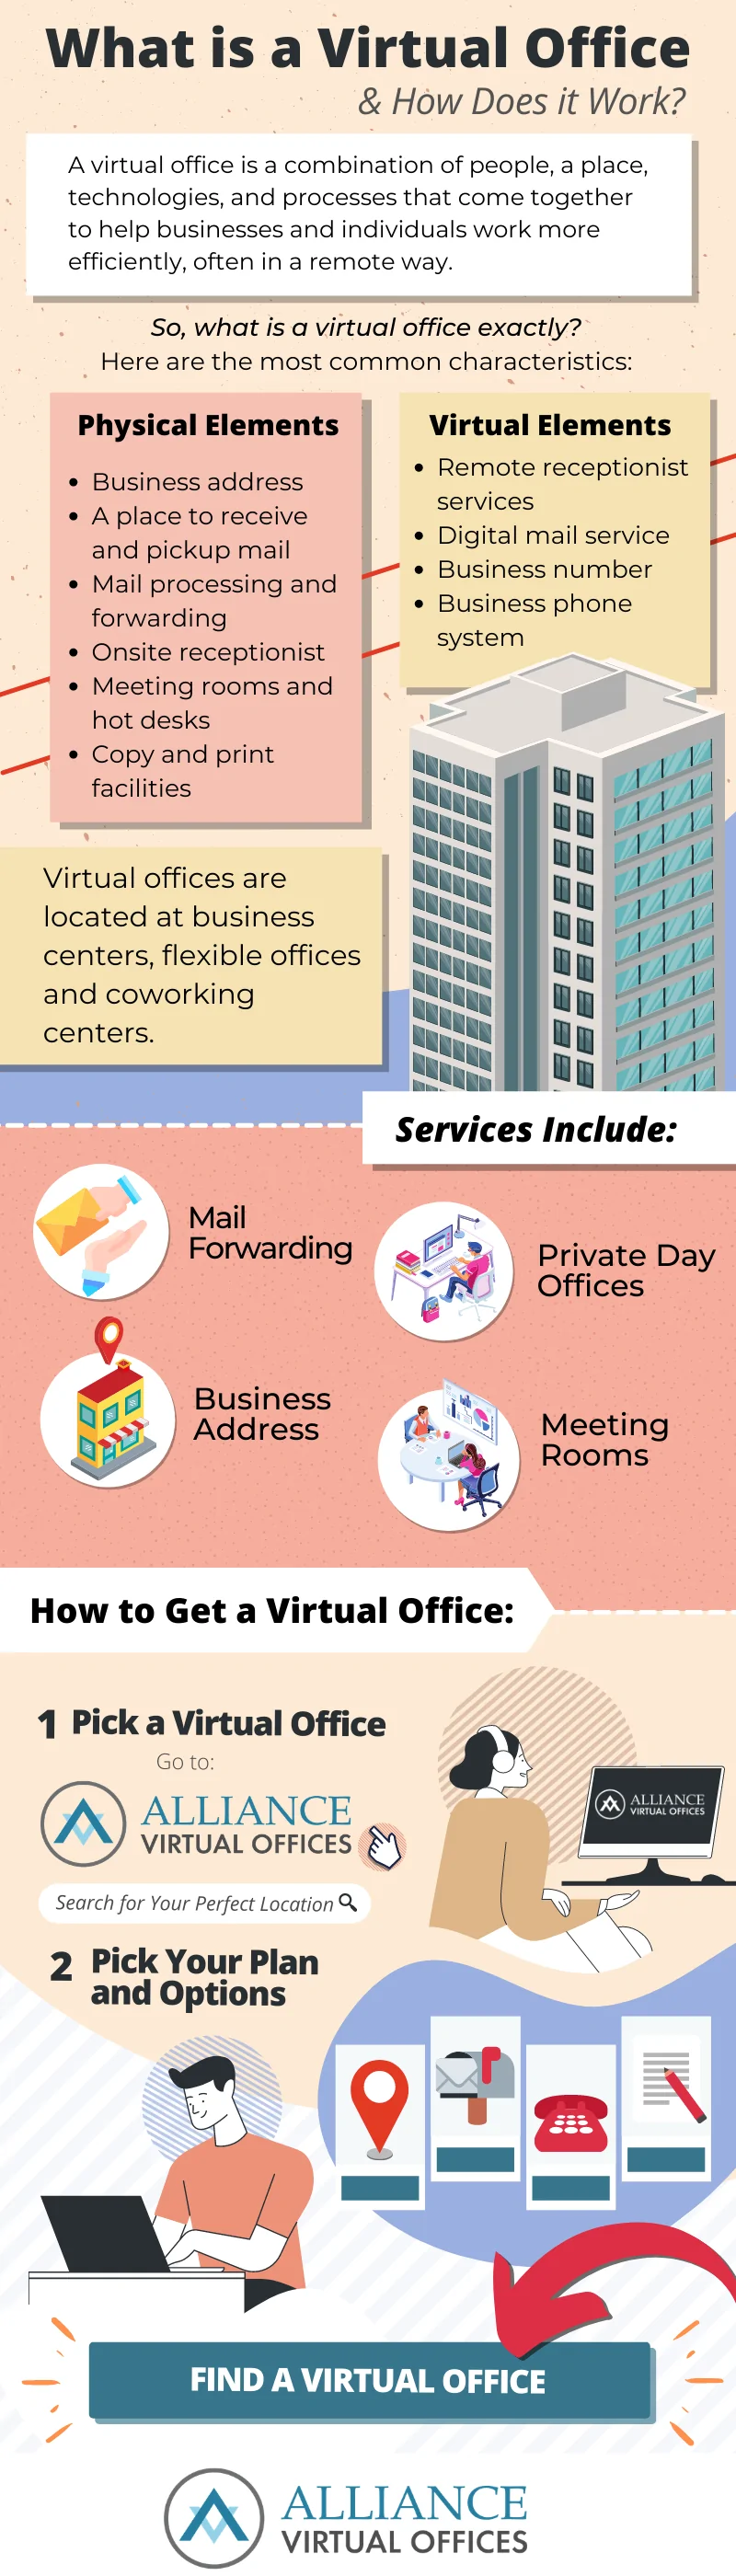 What is a Virtual Office and How Does it Work?